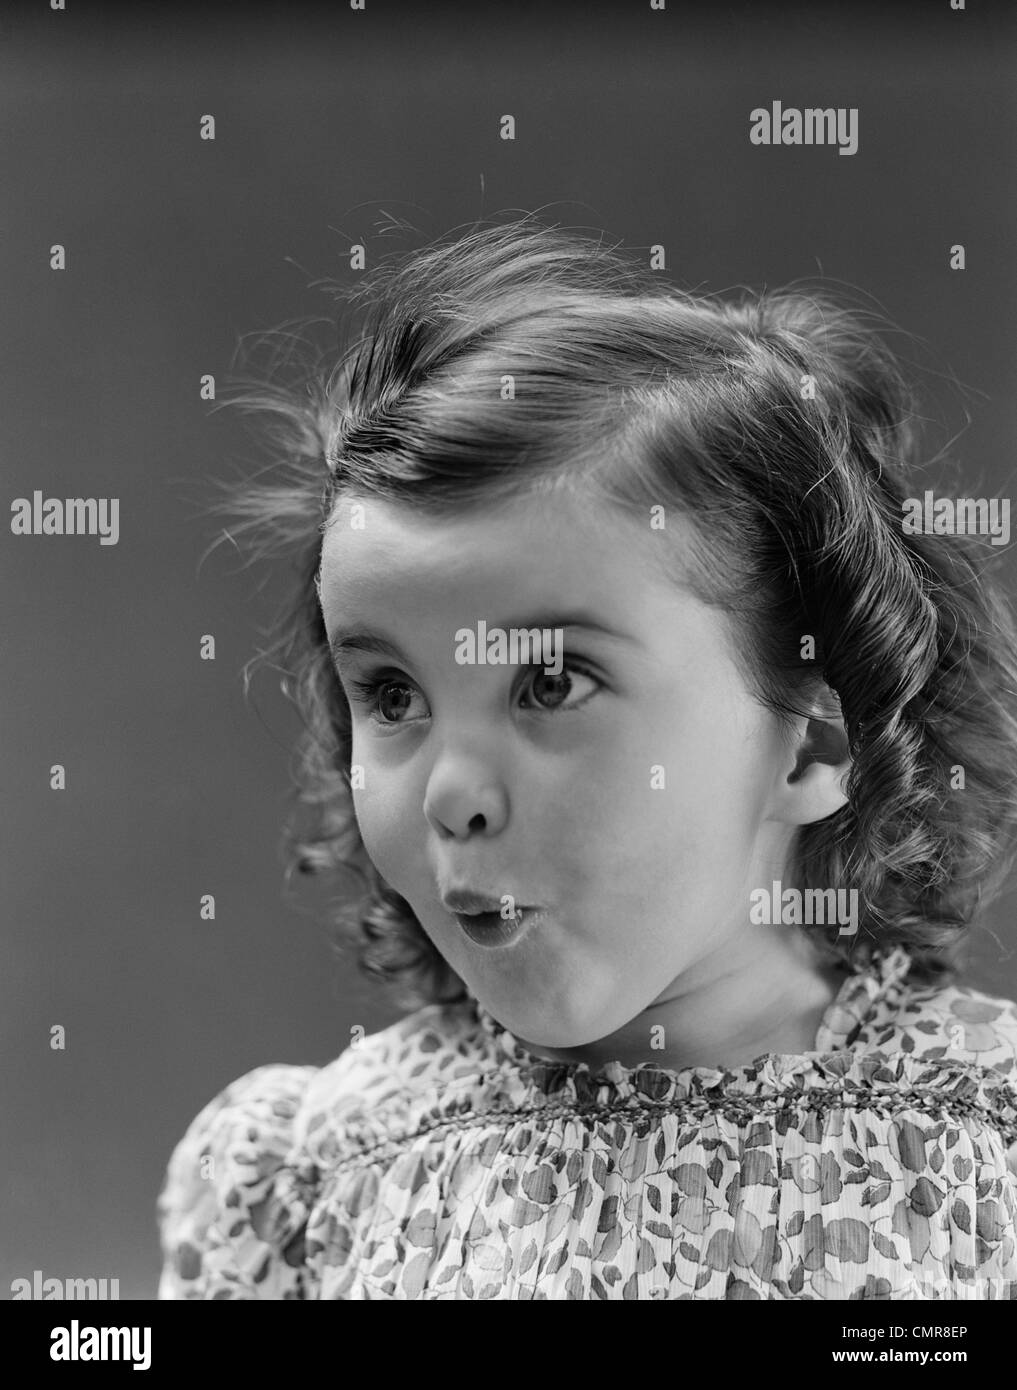 1930s PORTRAIT BRUNETTE LITTLE GIRL WITH SURPRISED AMAZED FACIAL EXPRESSION Stock Photo